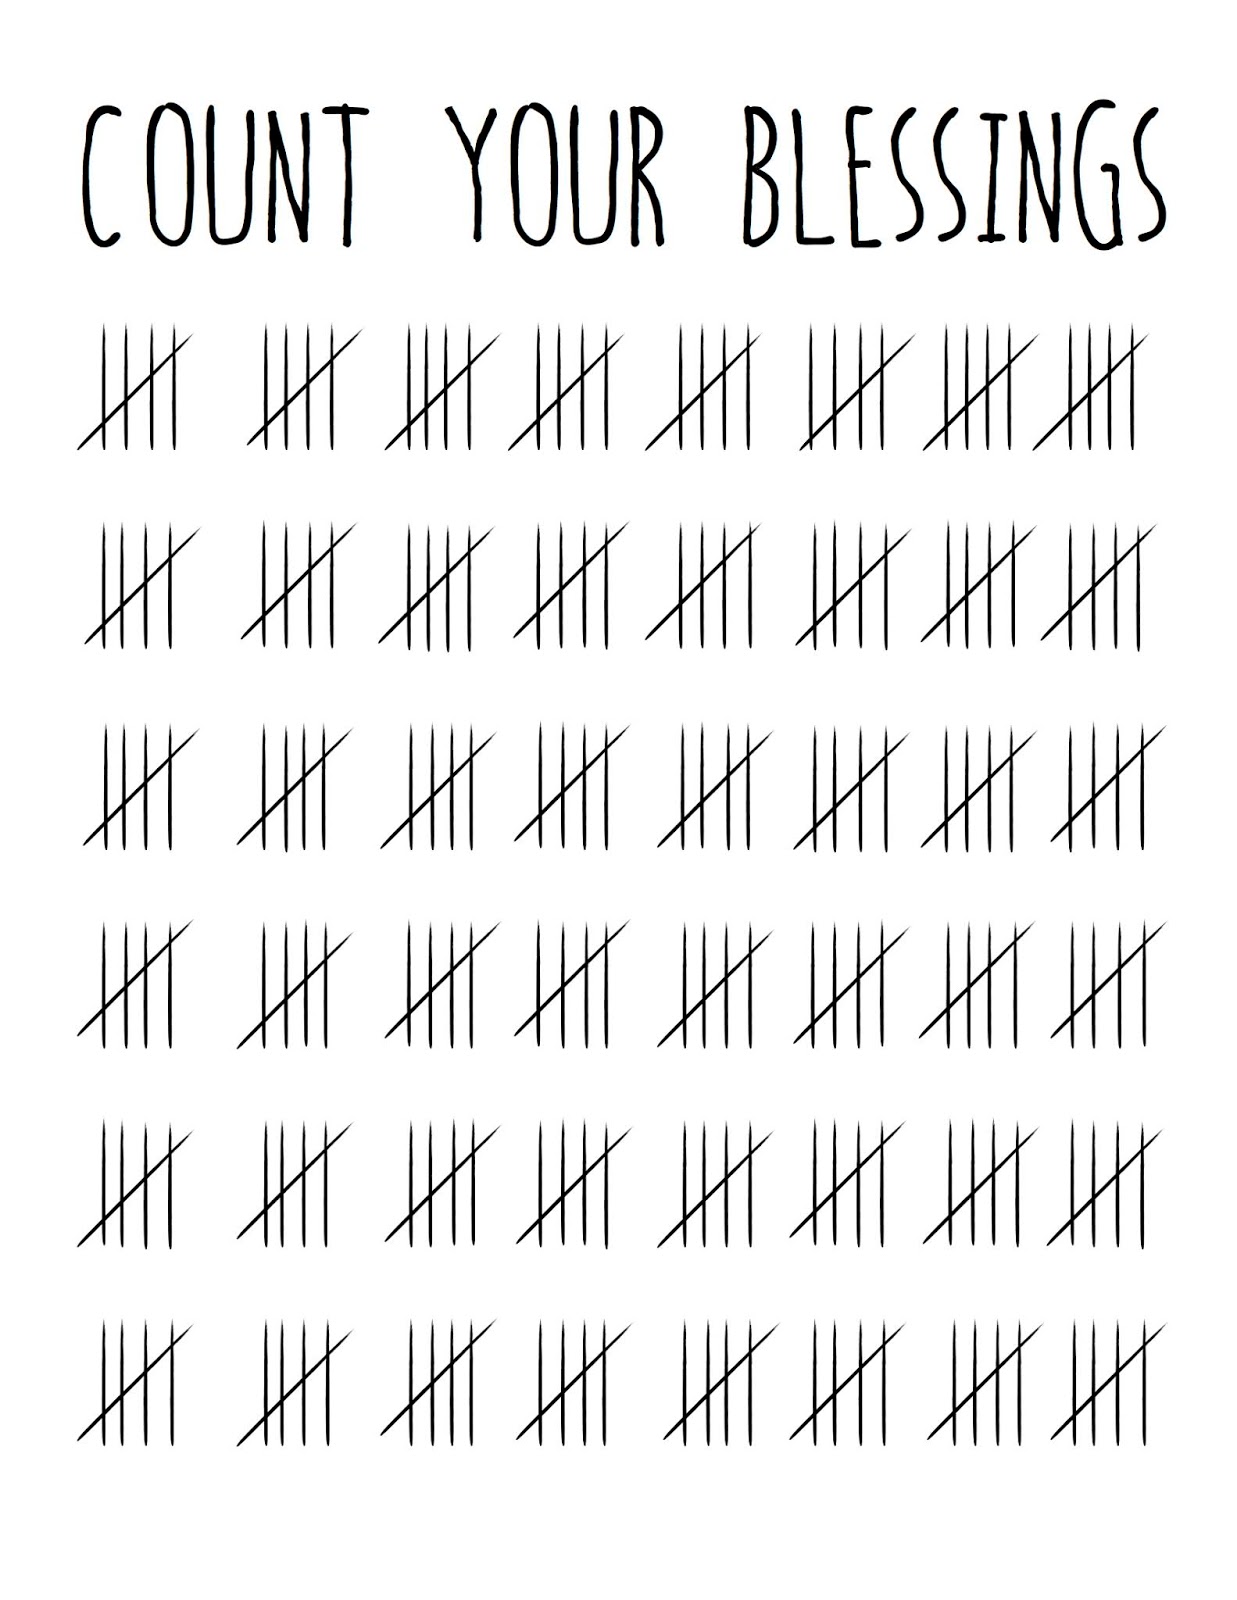 grey-birch-designs-free-count-your-blessings-printable